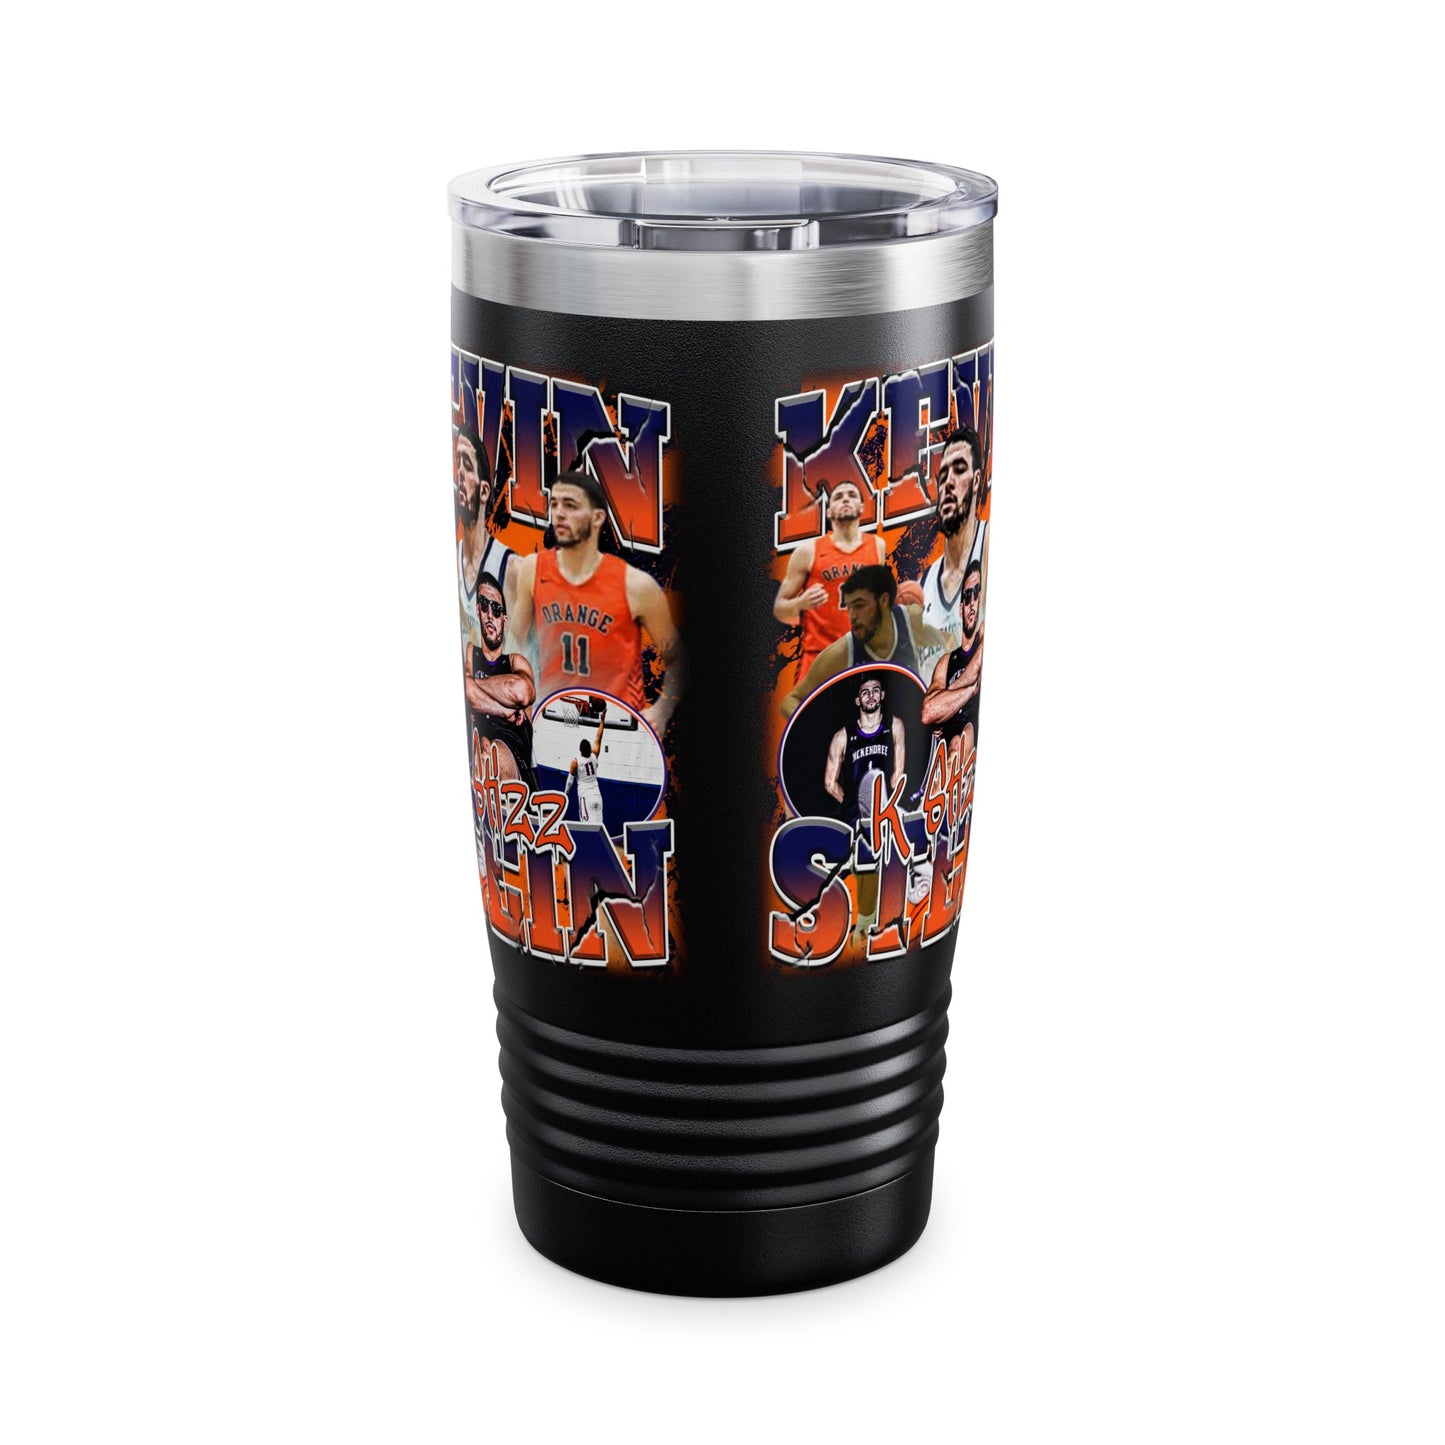 Kevin Stein Stainless Steal Tumbler